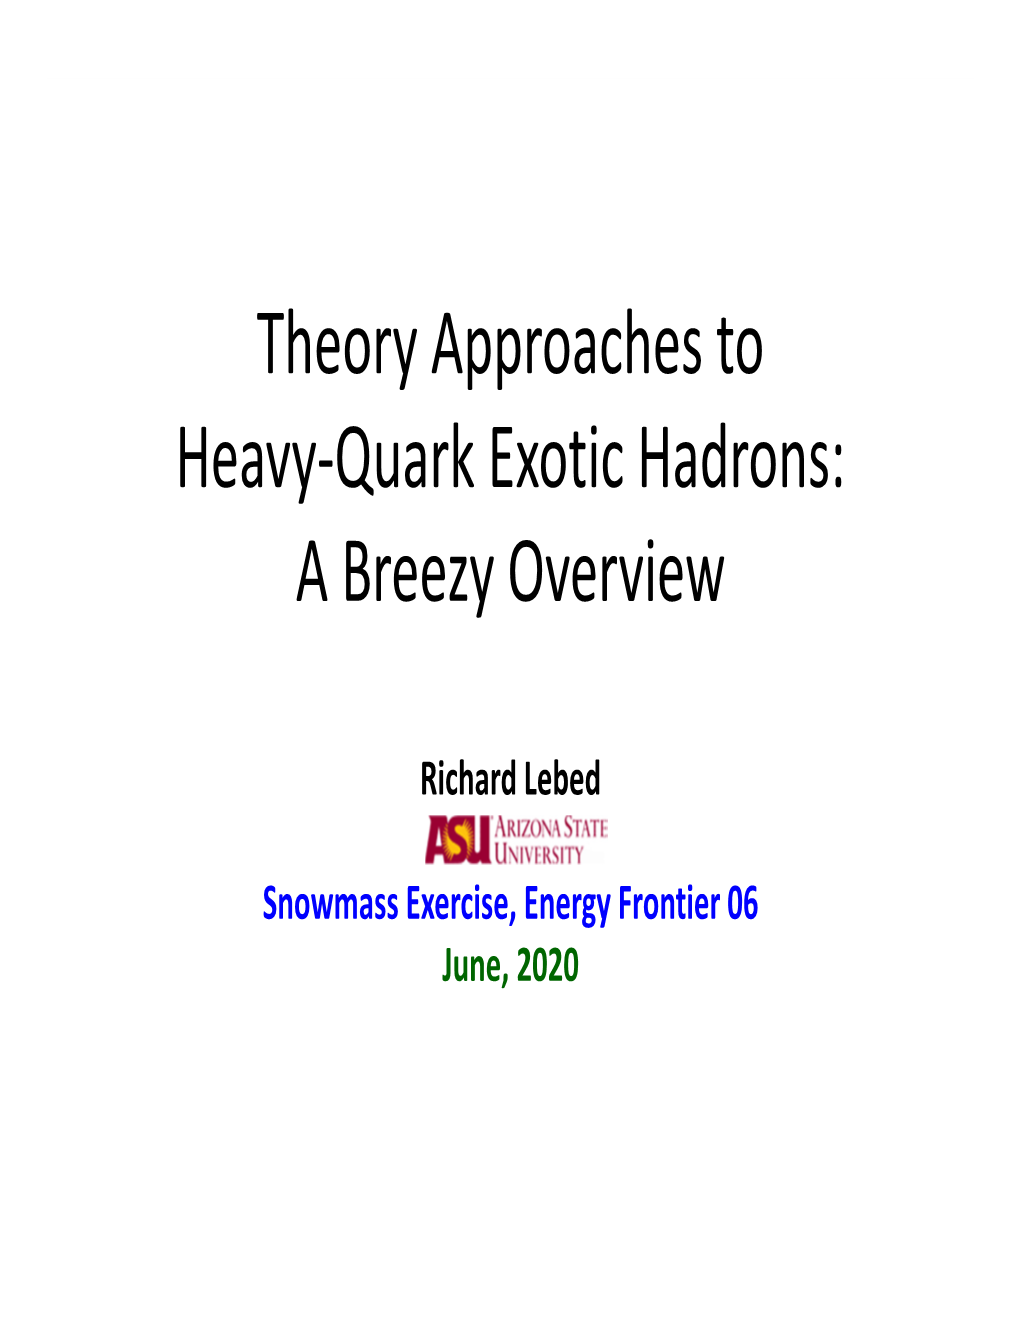 Theory Approaches to Heavy-Quark Exotic Hadrons: a Breezy Overview